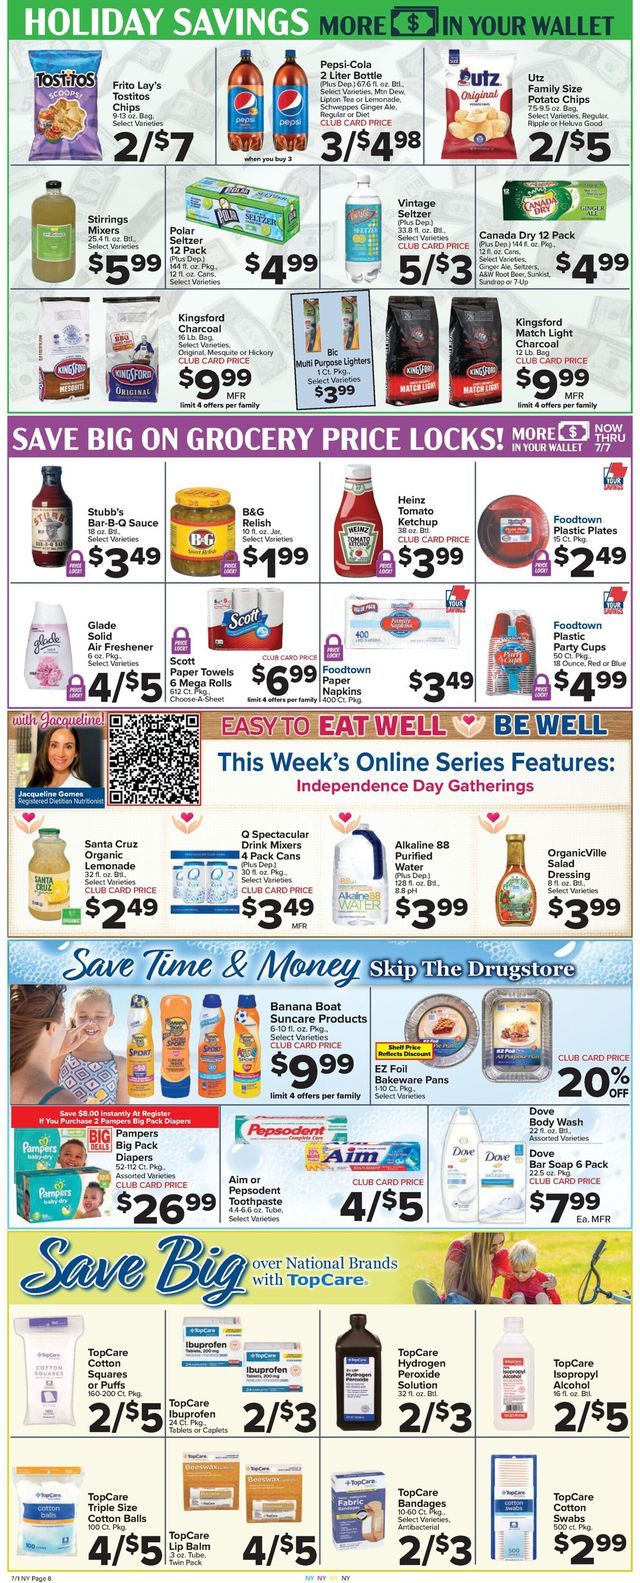 Foodtown Ad from 07/01/2022